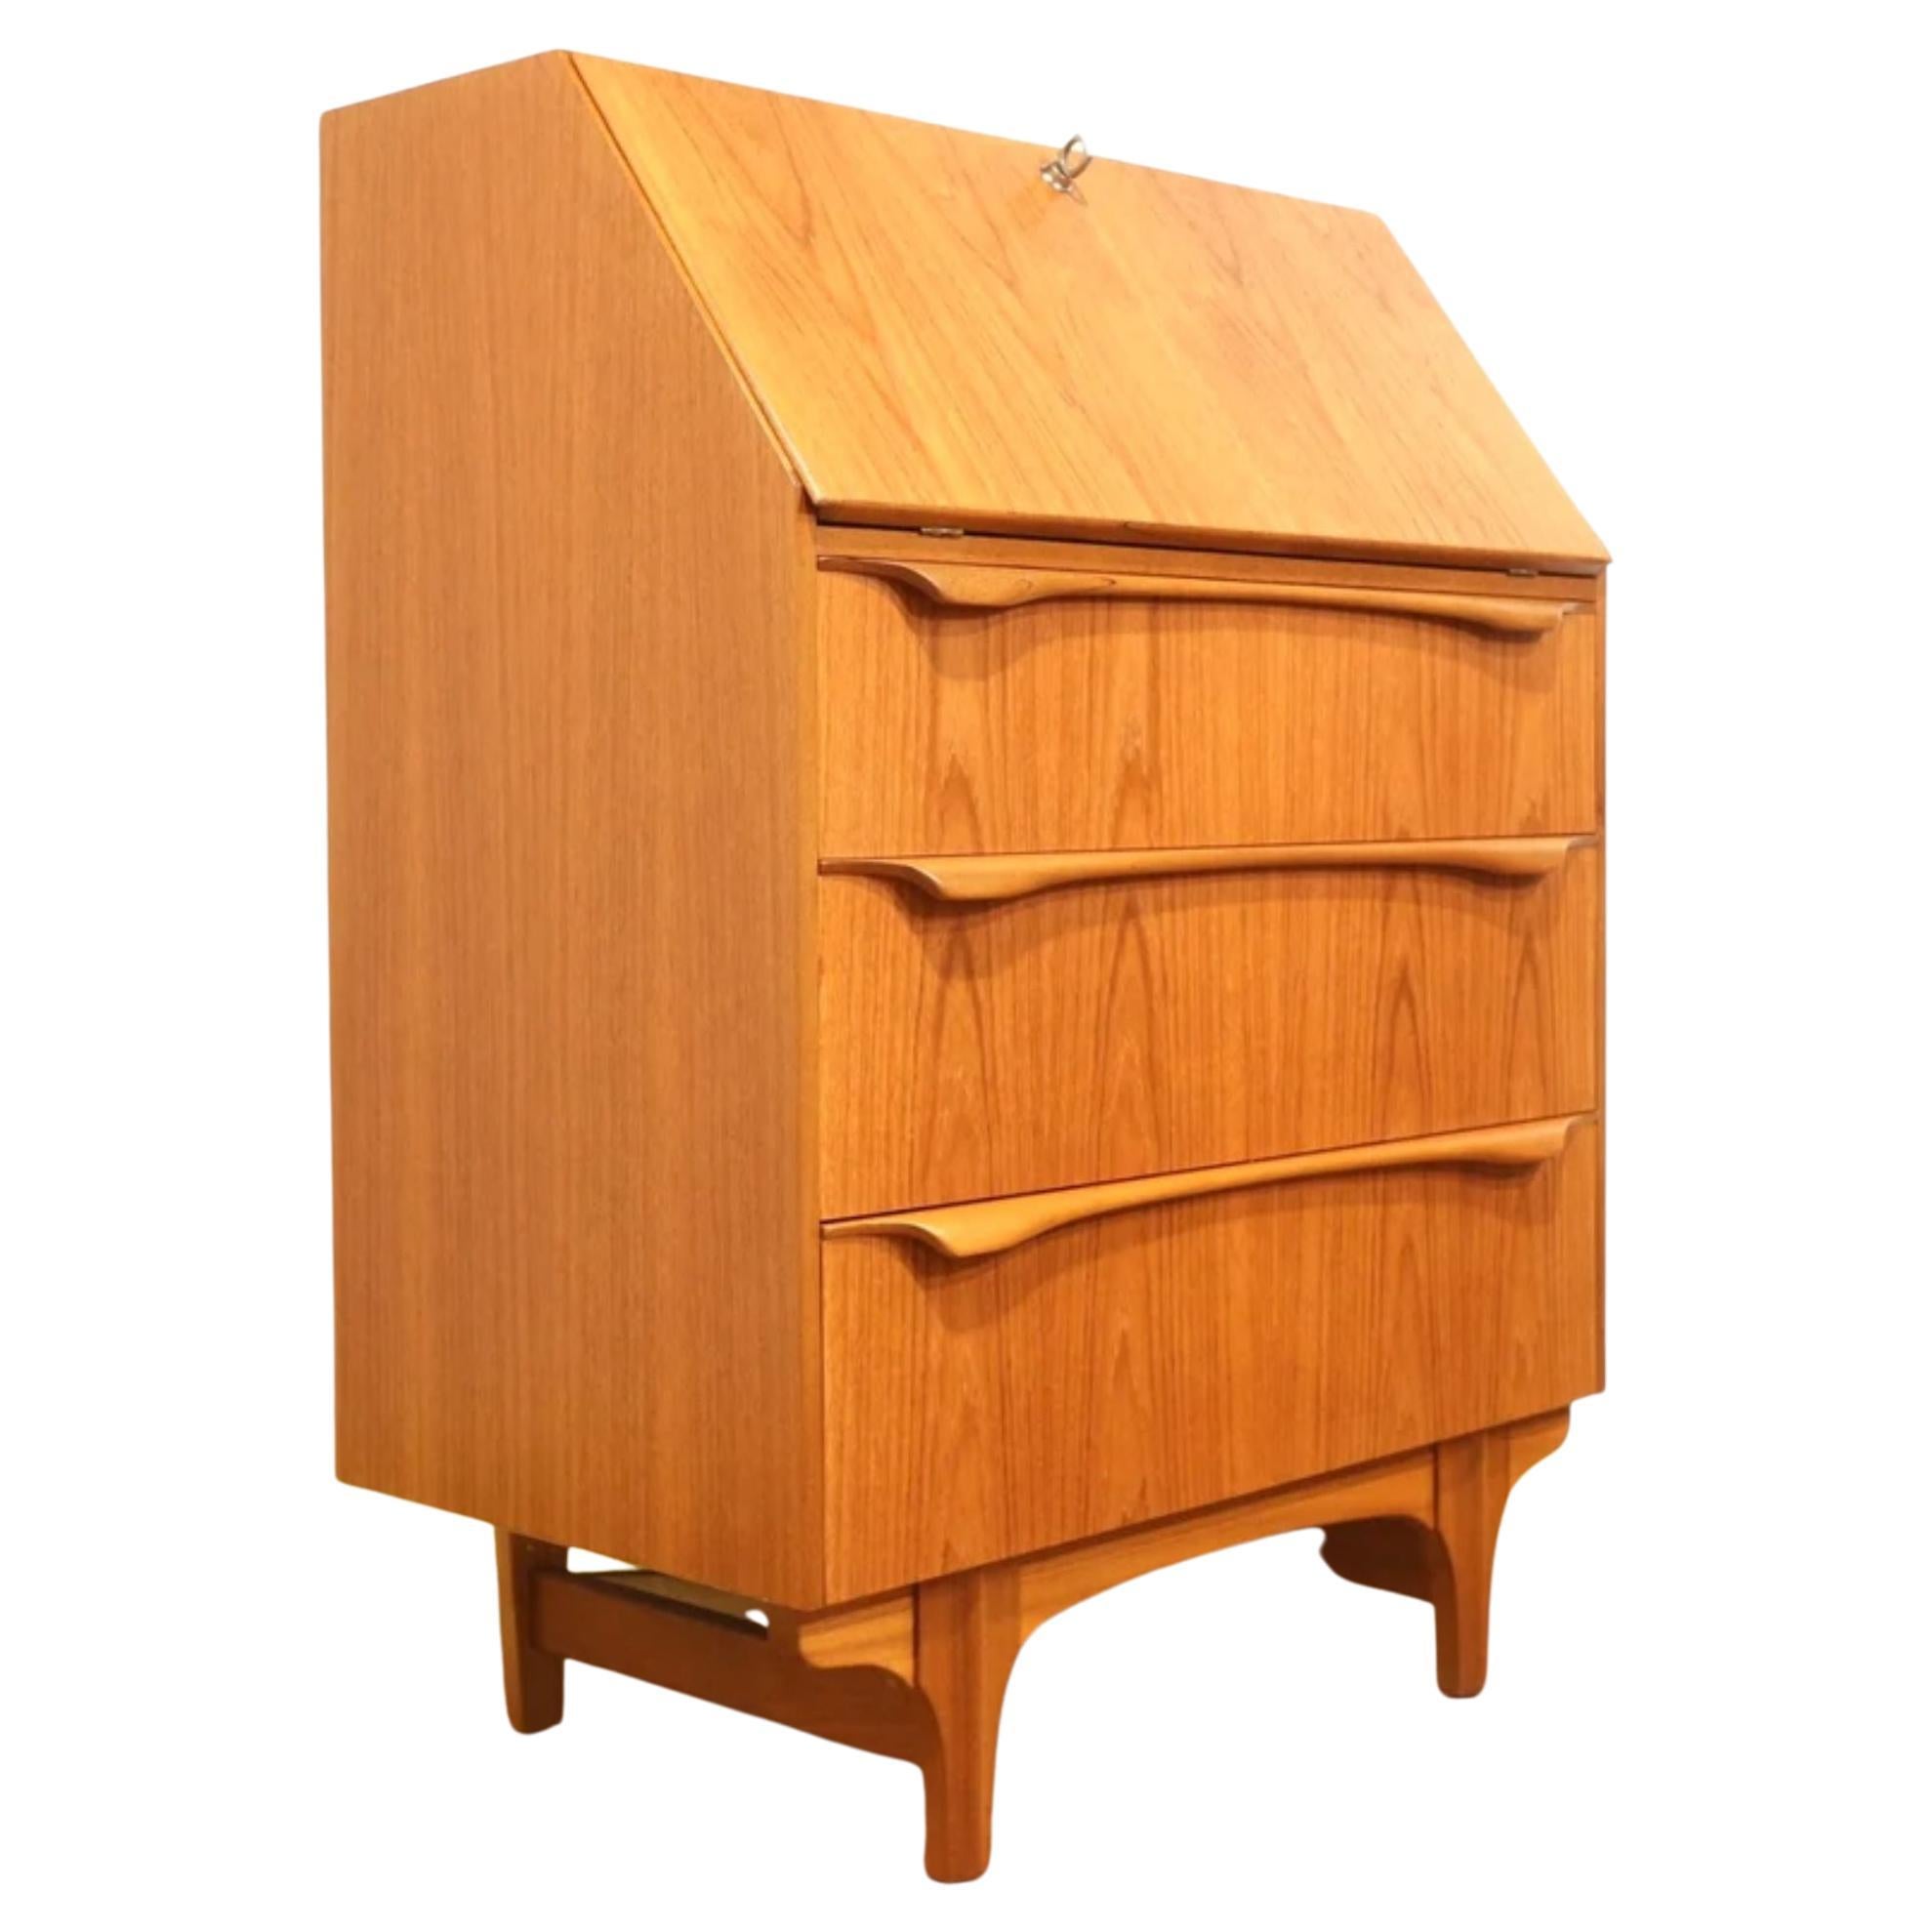 Mid-century teak bureau by Sutcliffe of Todmorden Furniture (S Form). UK made c1960s. Great for small spaces and perfect for working on a laptop or as a writing desk. There are three large drawers underneath a pull down work surface all set on short